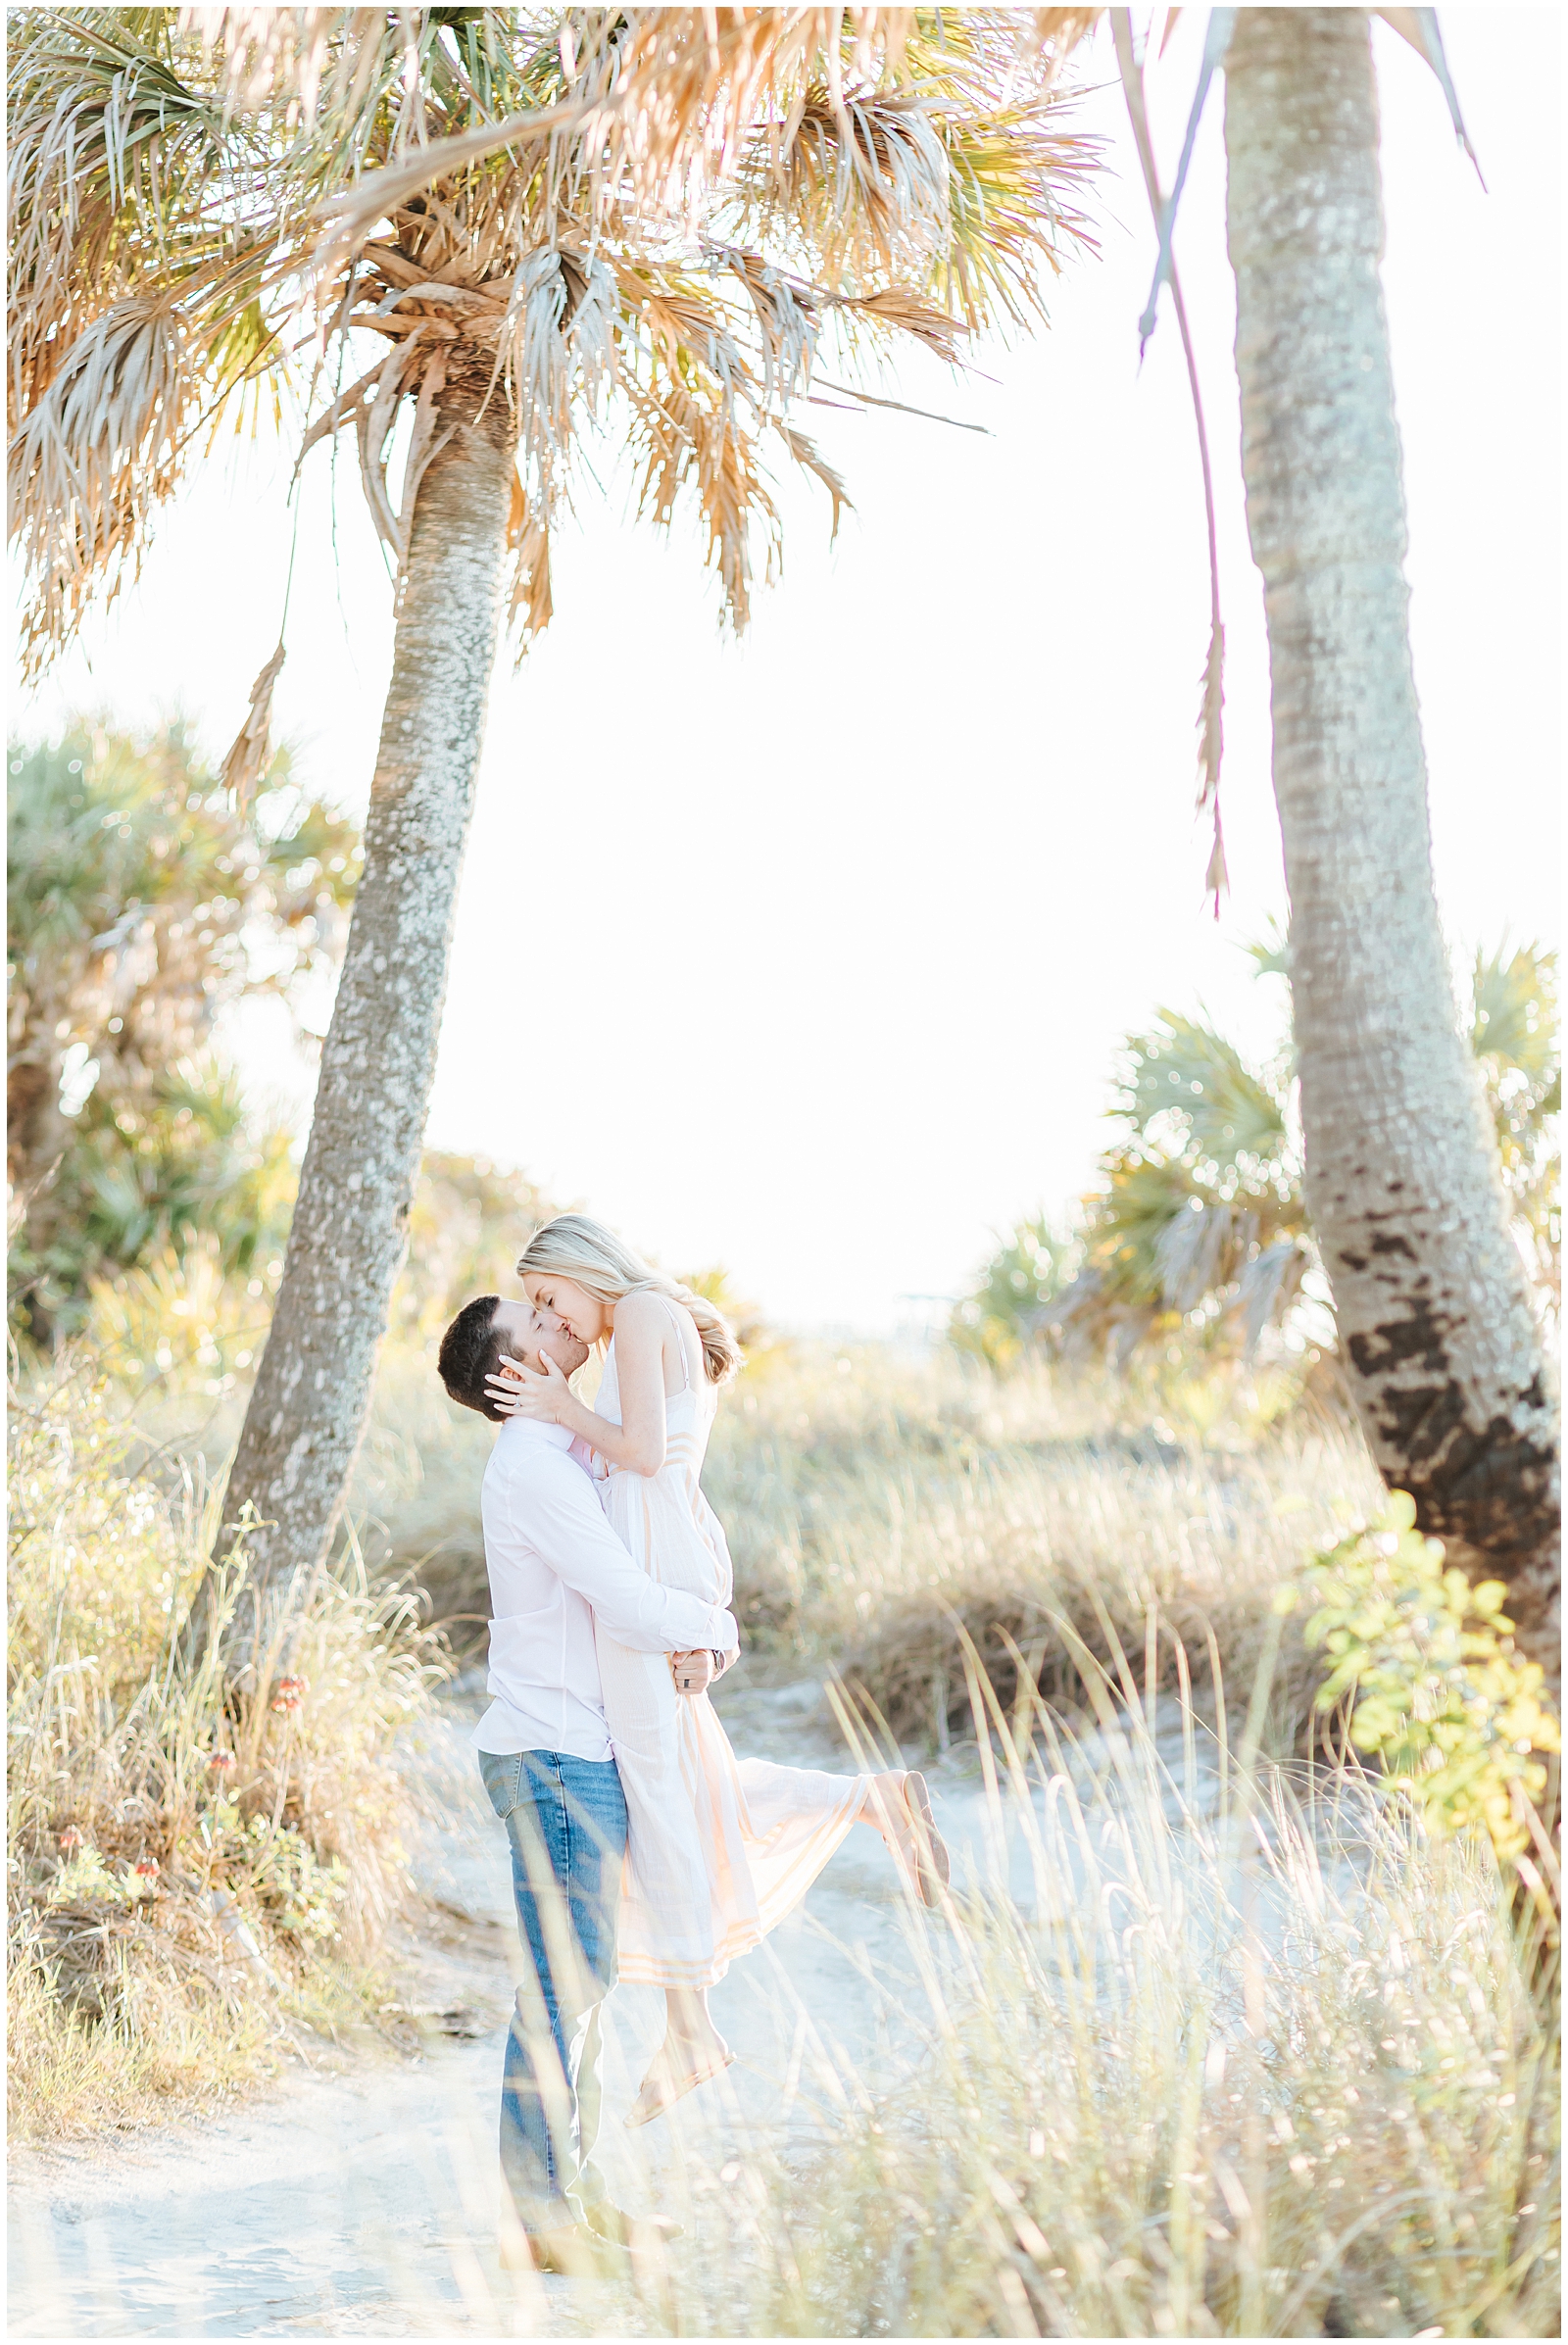 Dreamy Lift and Kiss on the beach with Palm Trees at Fort Desoto Park in Florida